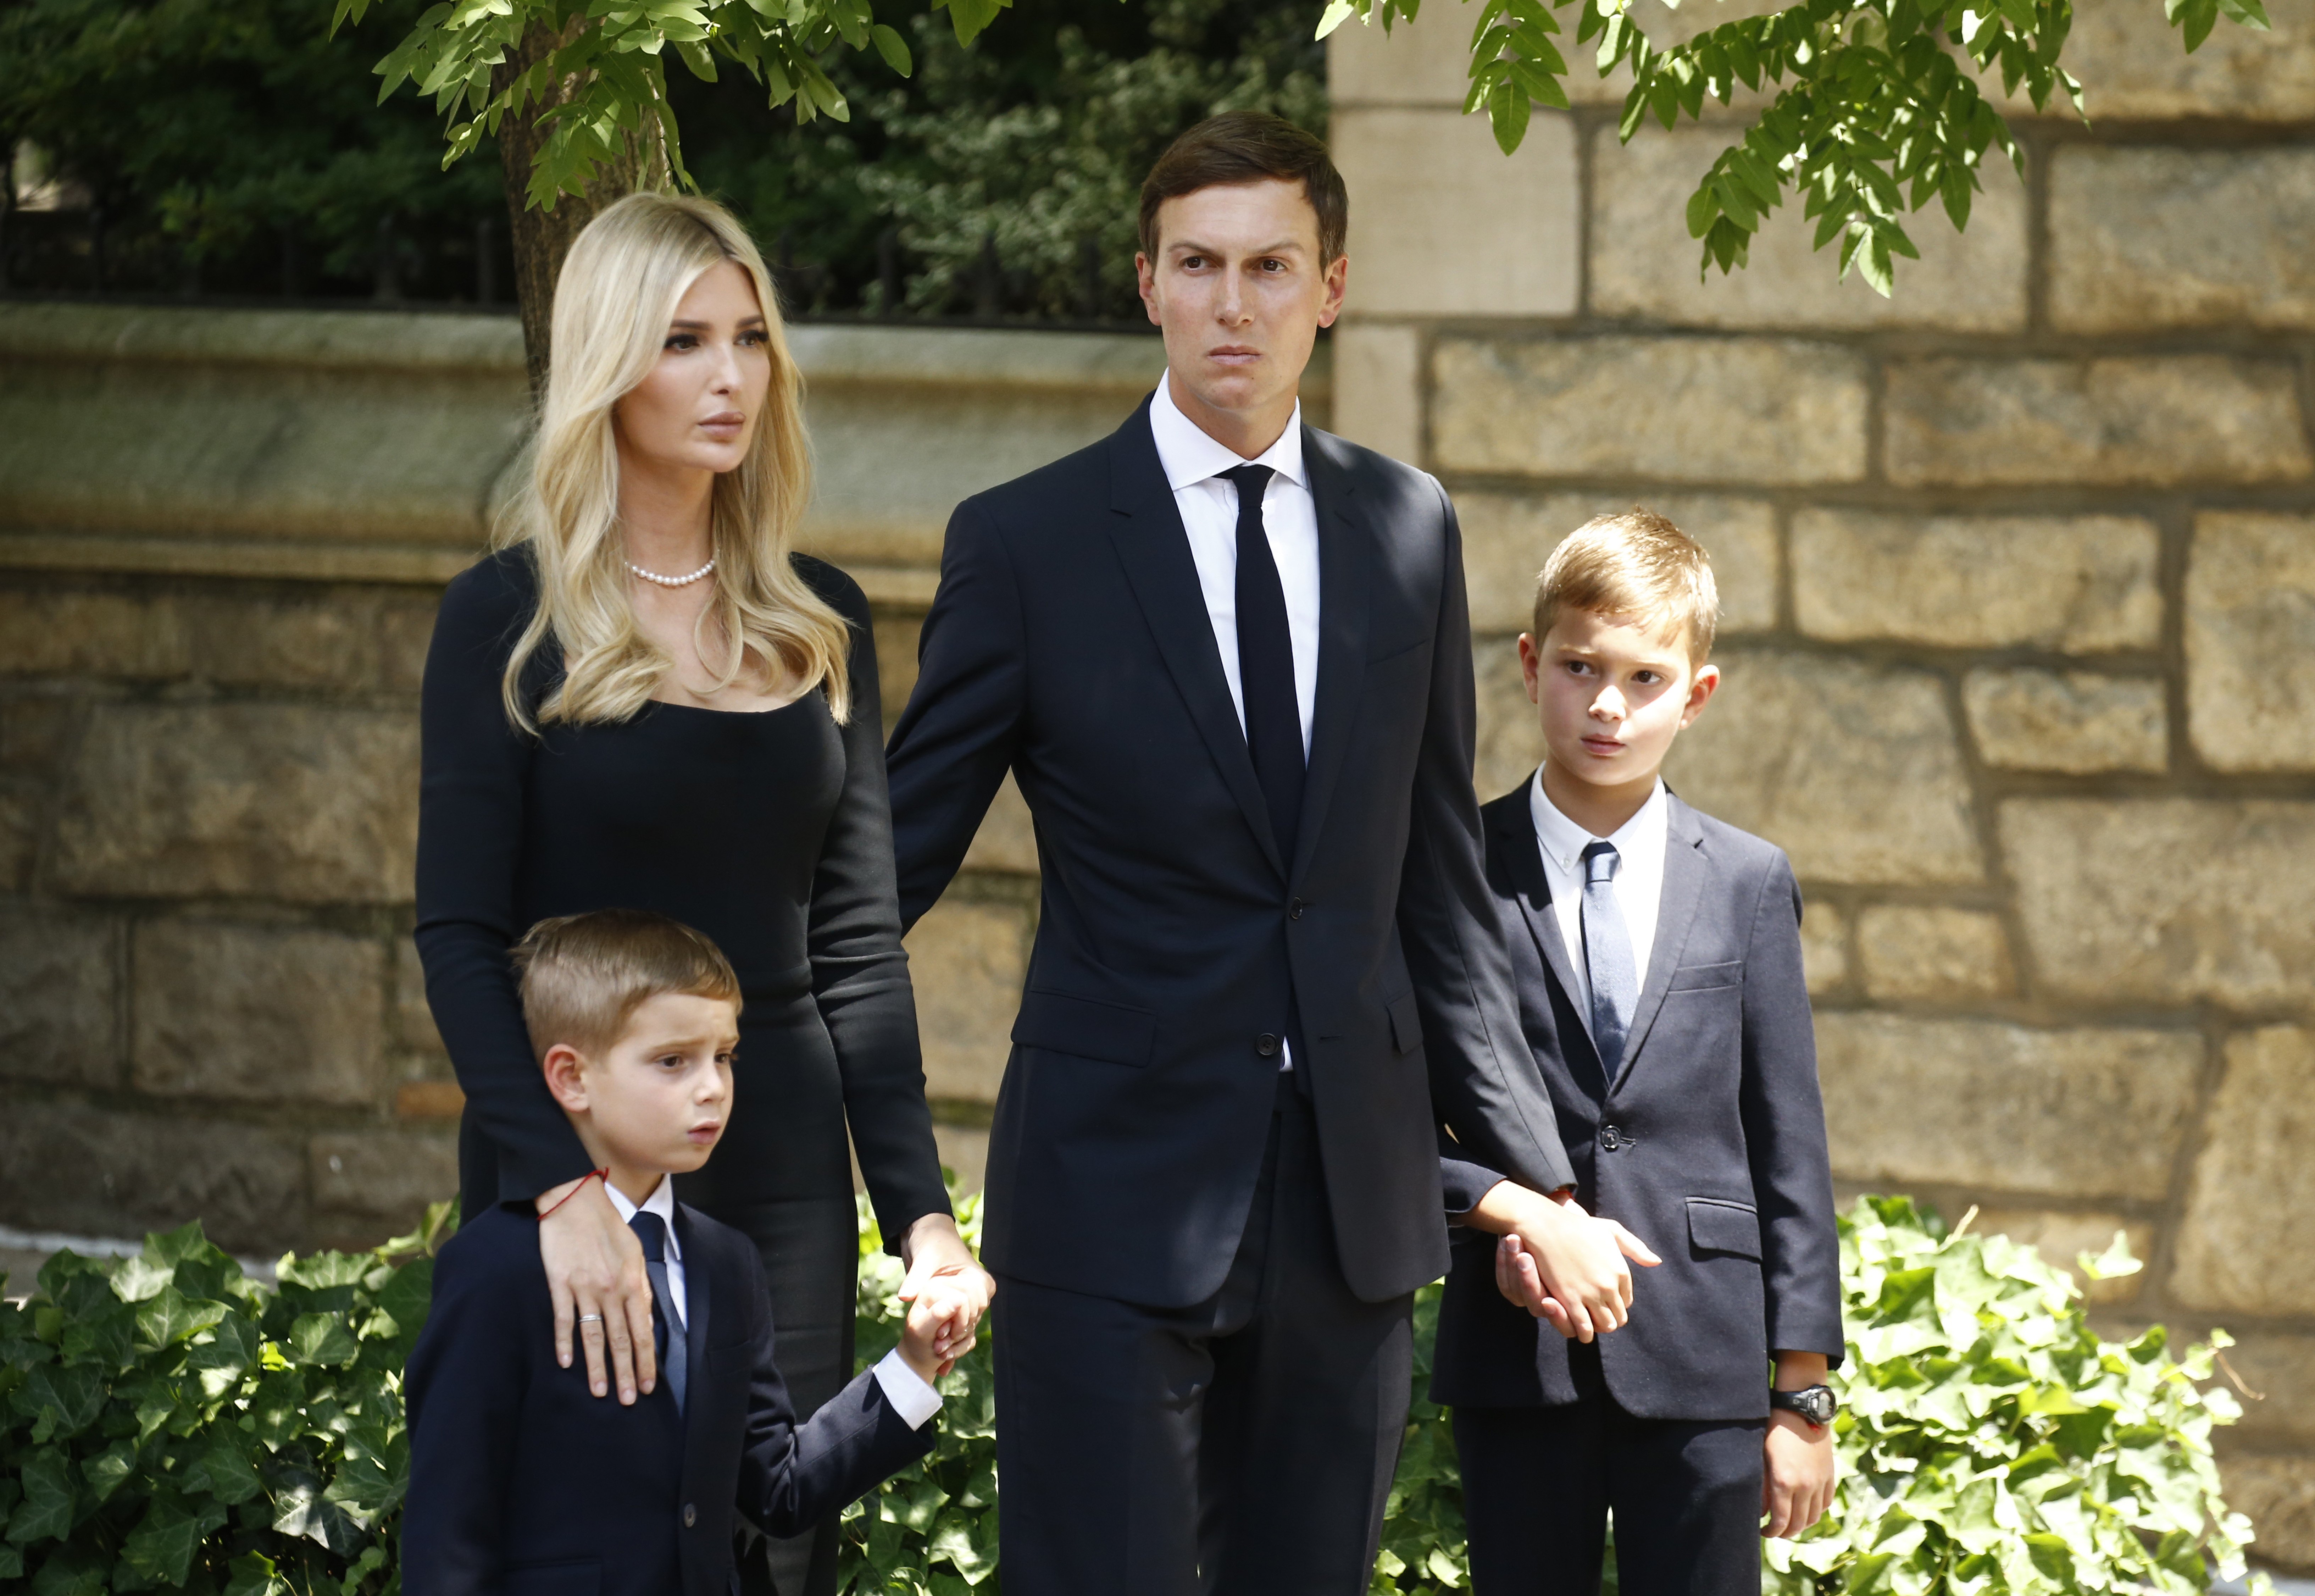 Ivanka Trump with her husband Jared Kushner and sons Theo Kushner and Joseph Kushner attending the funeral of Ivana Trump at St. Vincent Ferrer Roman Catholic Church on July 20, 2022 in New York City.┃Source: Getty Images